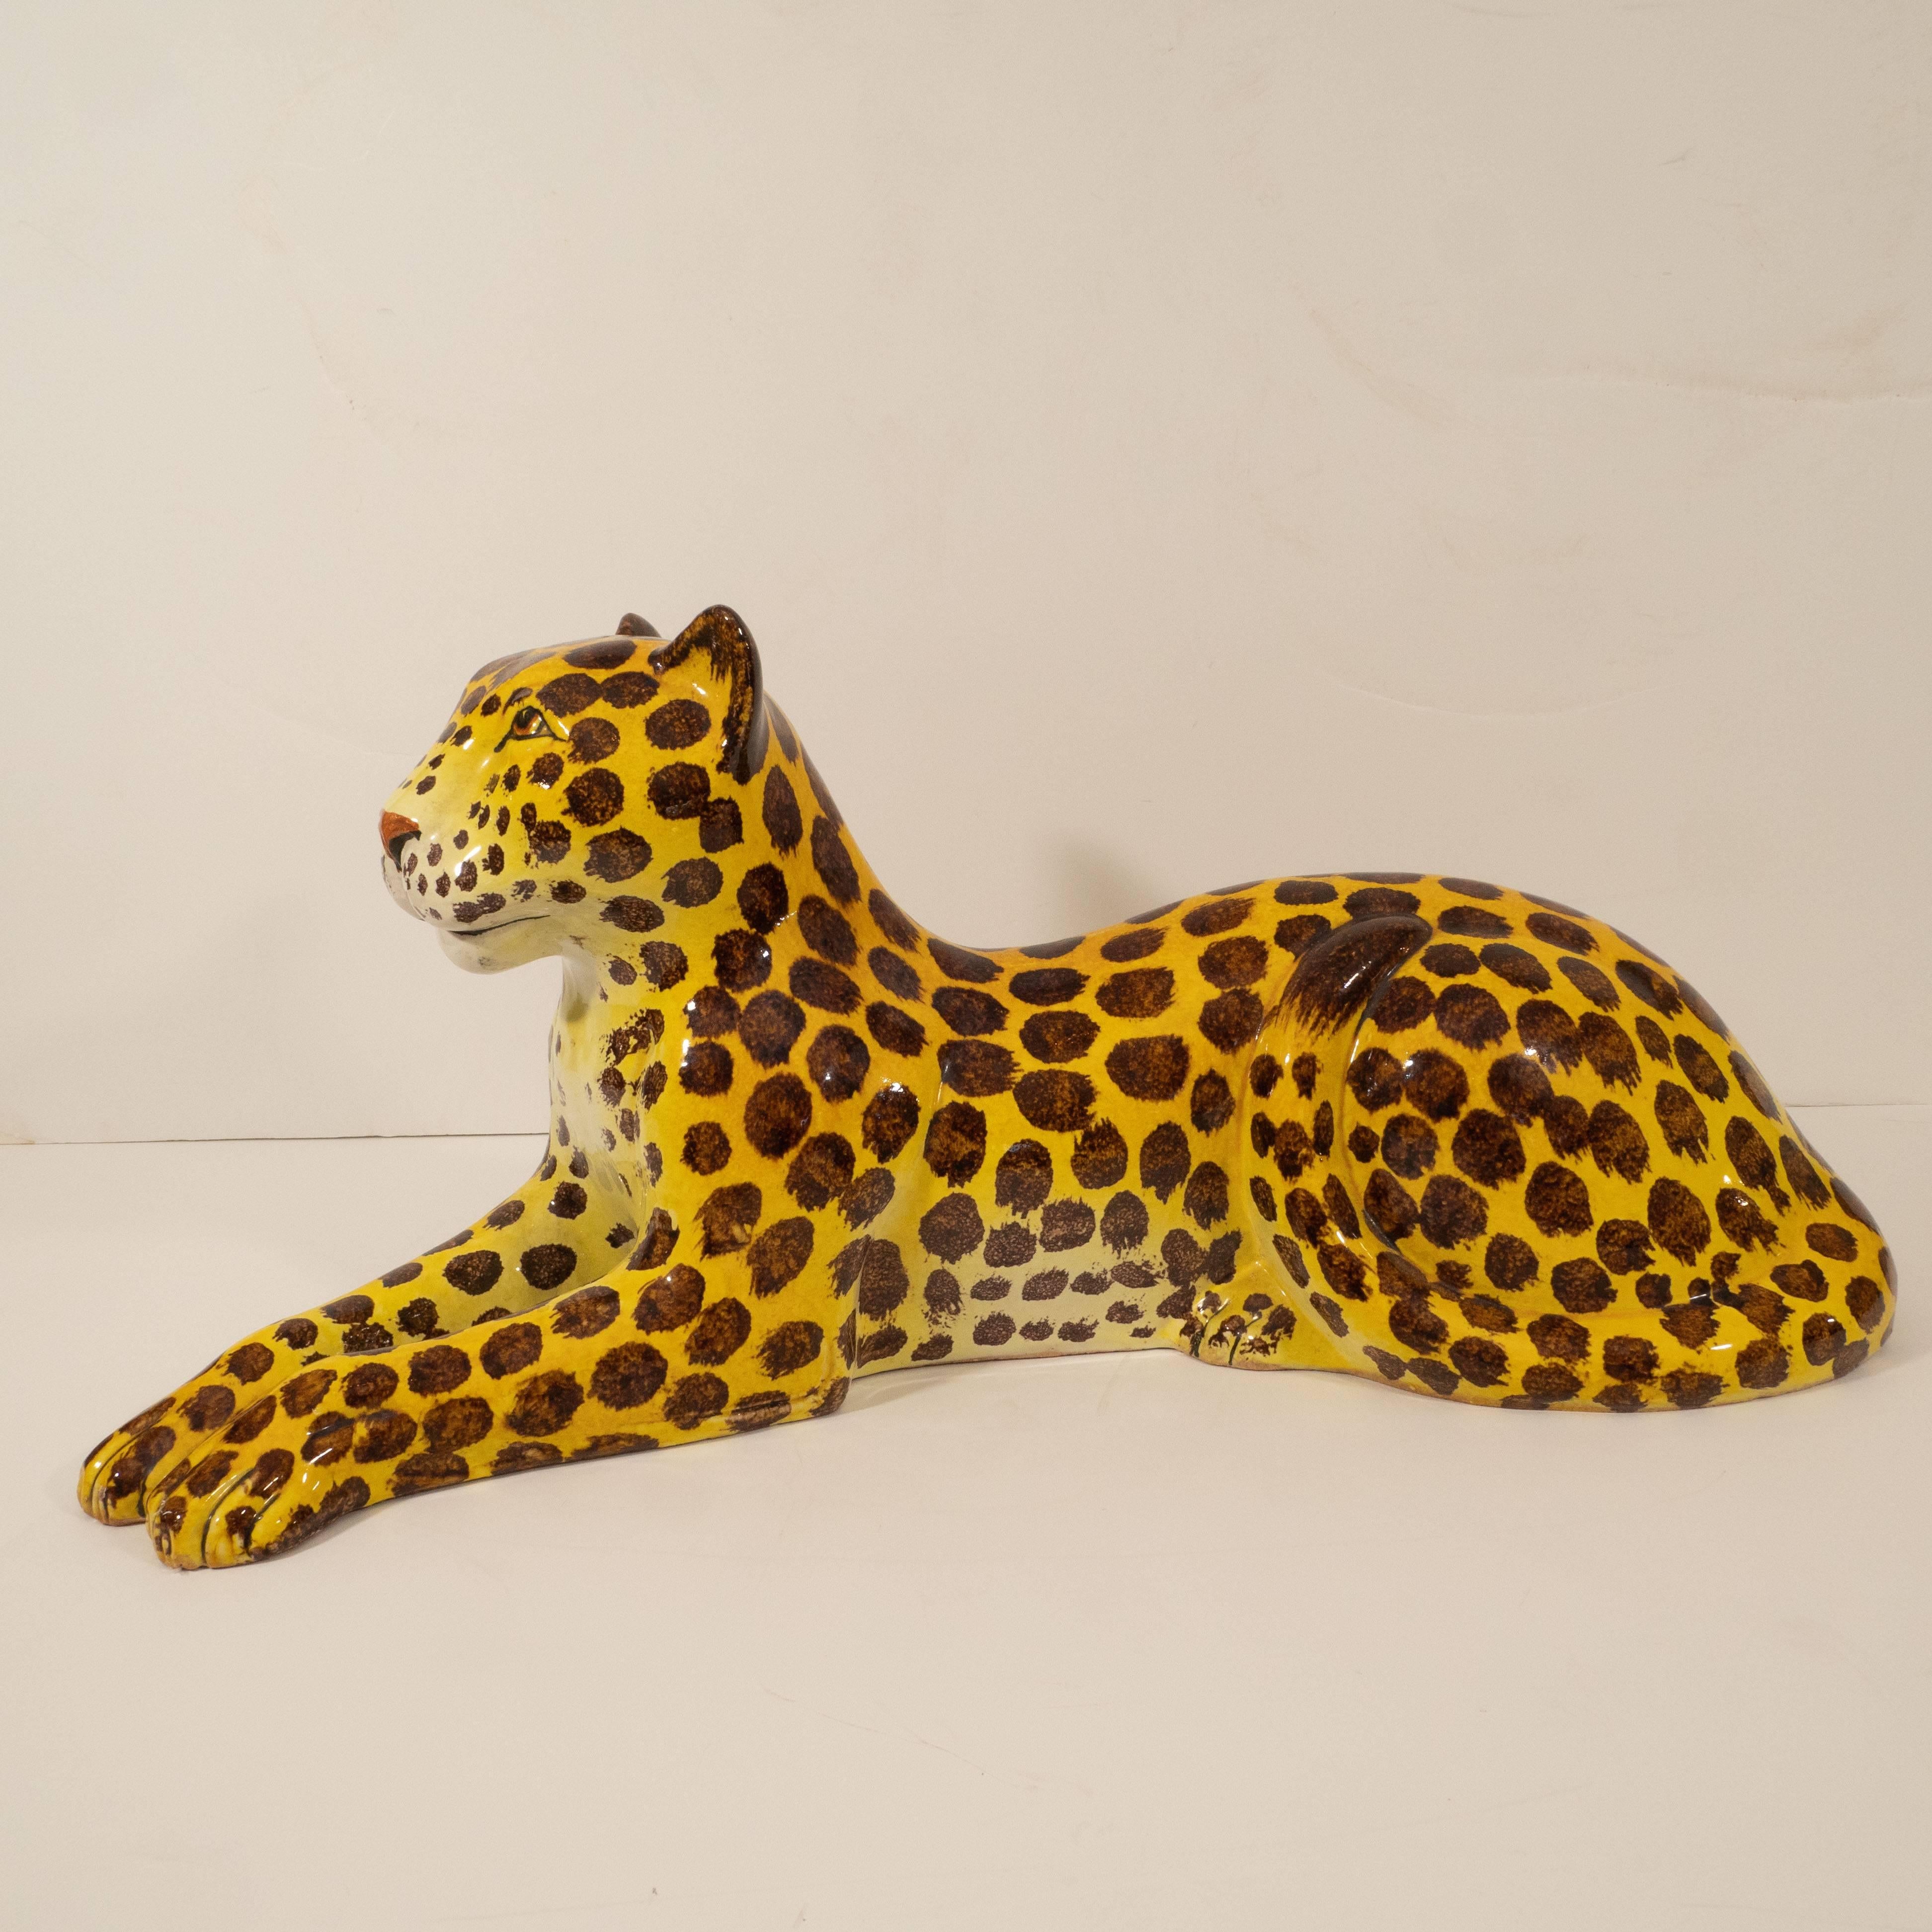 Sometimes adding an animal to the mix makes for a lively interior. This charming leopard, in a resting position, caught our eye with its beautiful color and glaze.